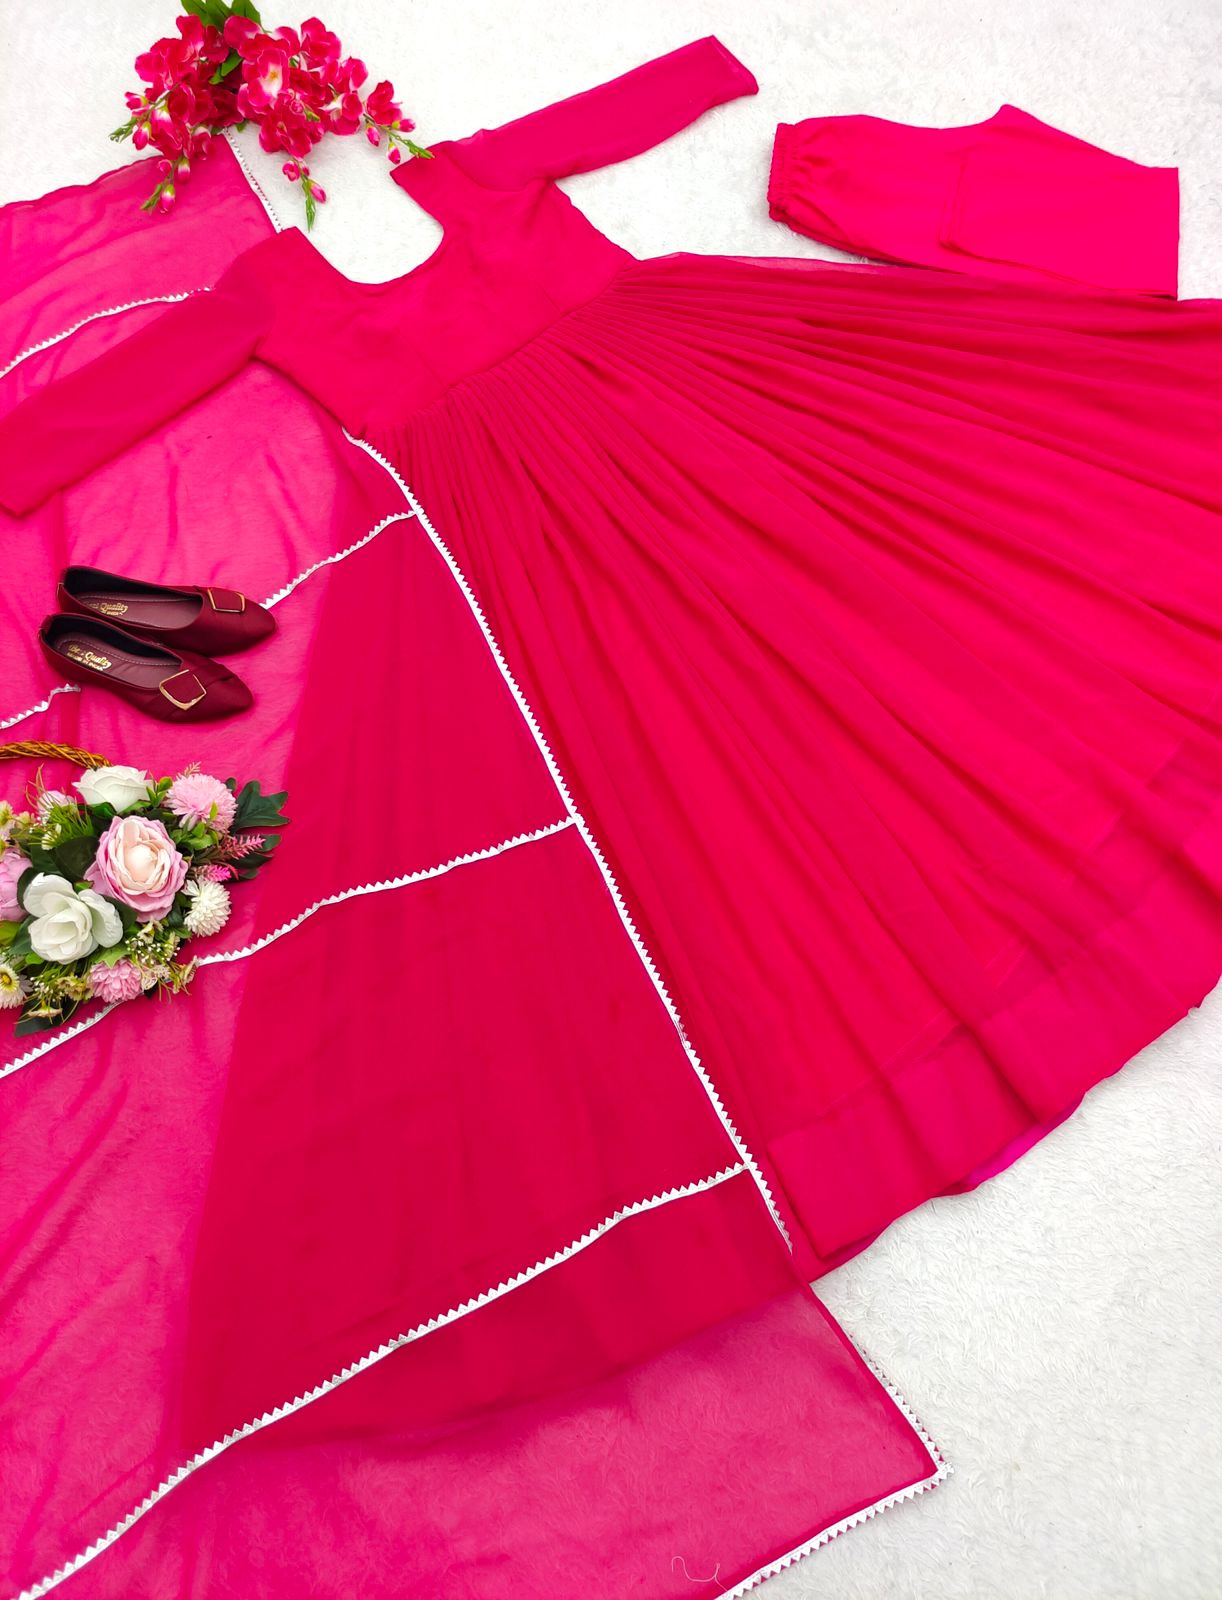 Outstanding Plain Dark Pink Color Gown